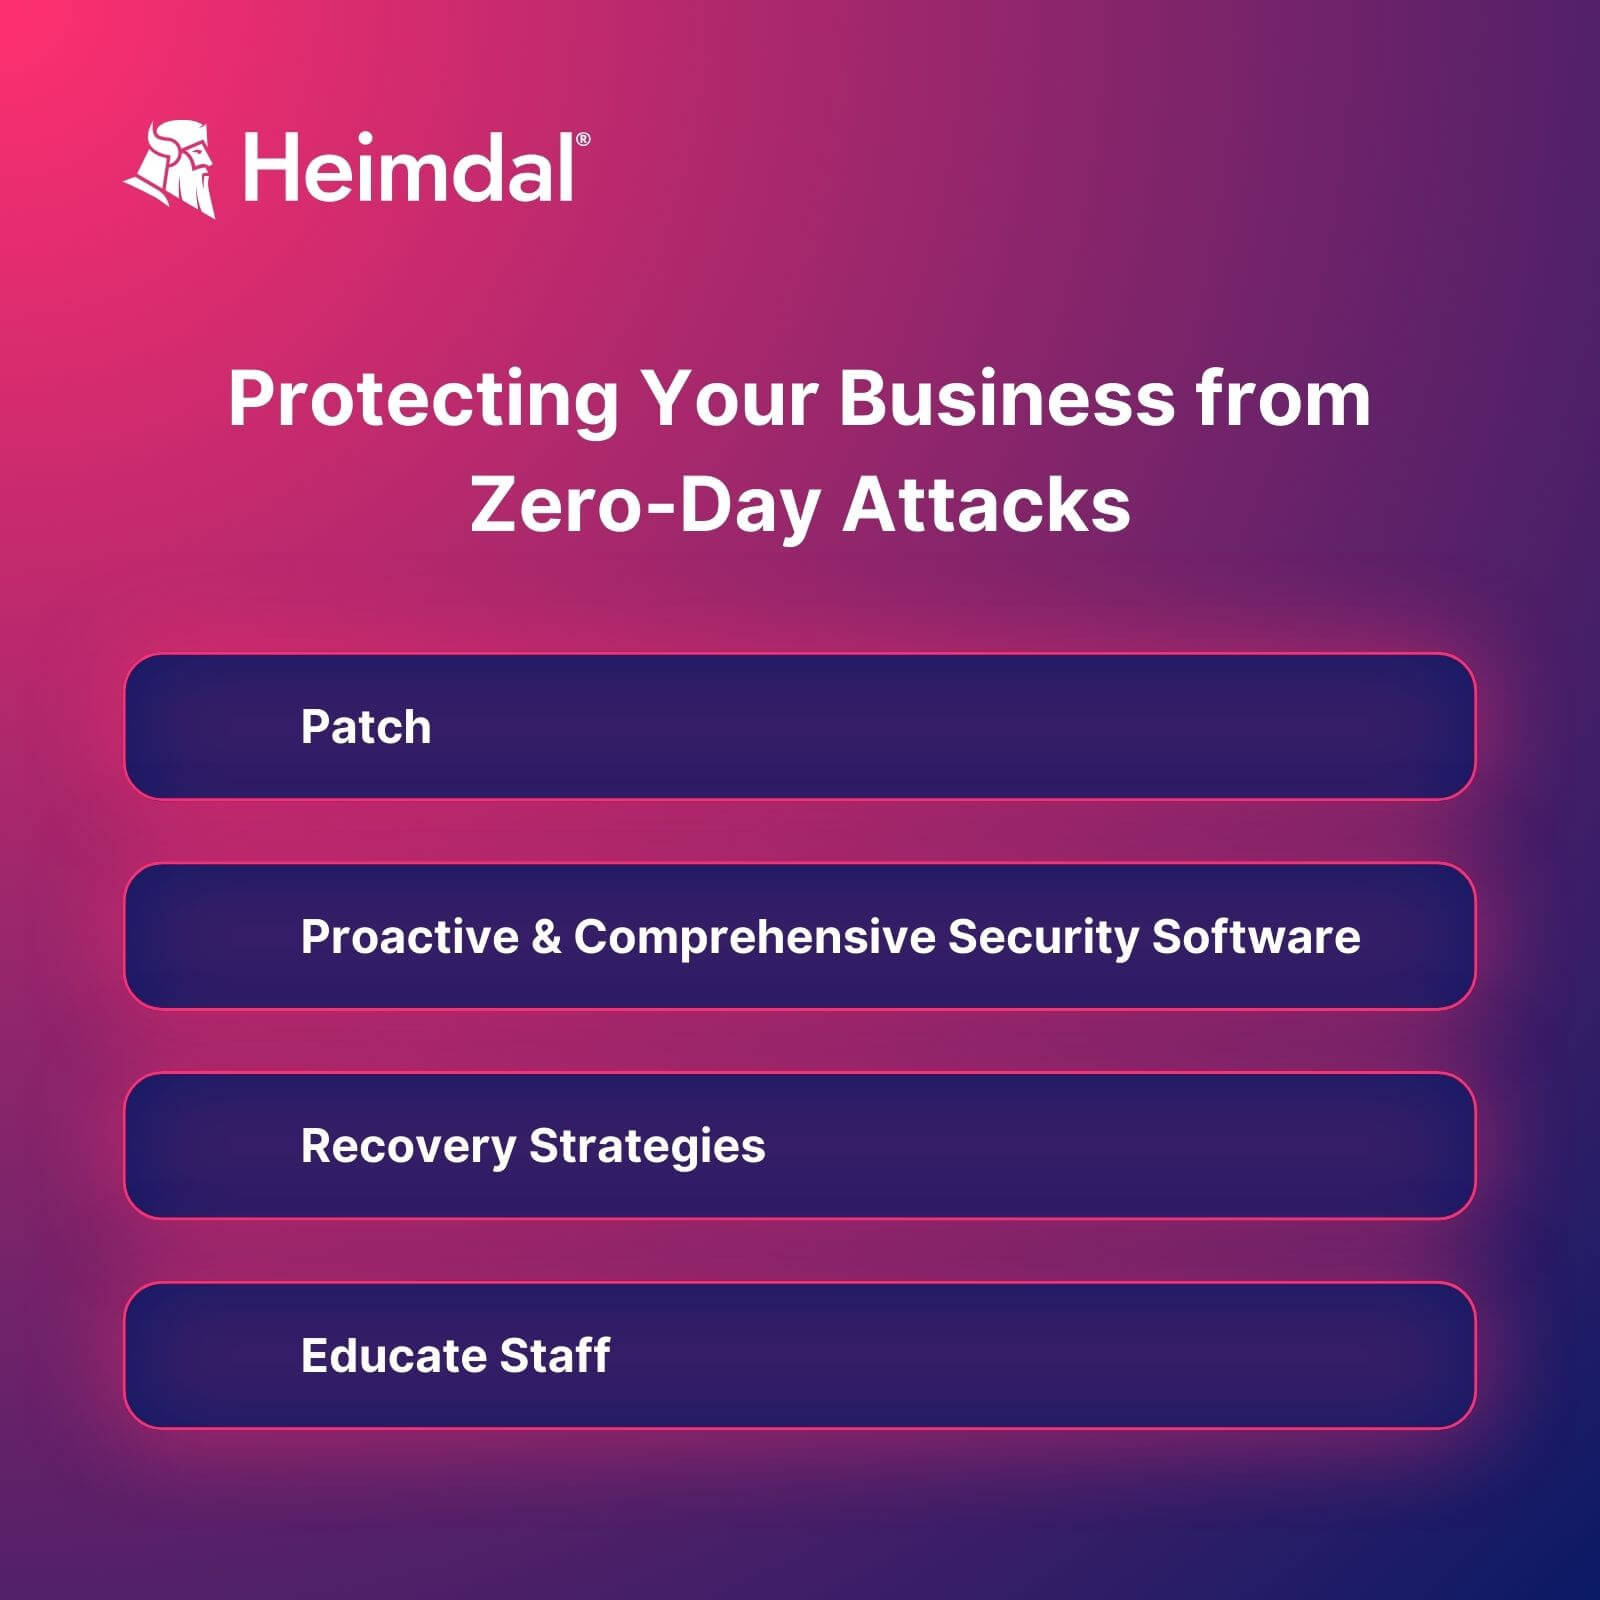 Steps to Protect Your Business from Zero-Day Attacks